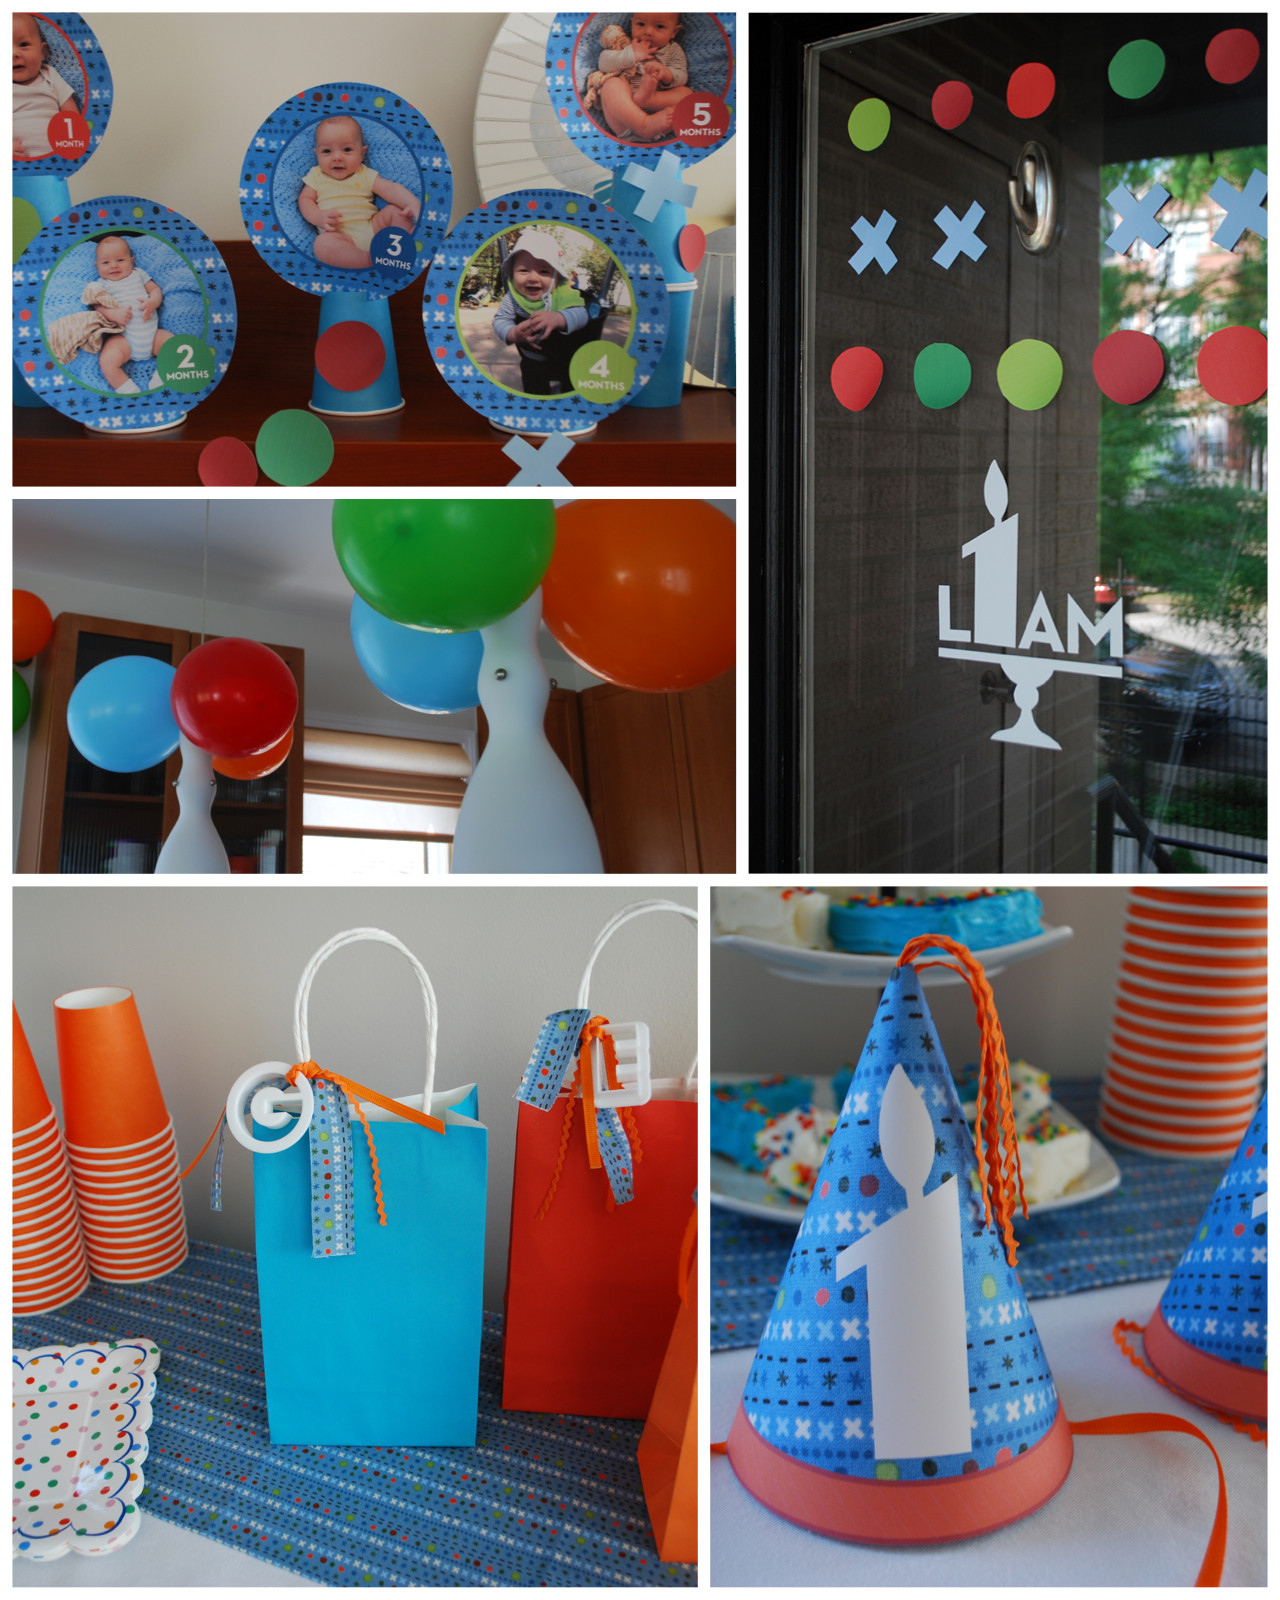 DIY First Birthday Gifts
 DIY 1st Birthday Party Theme Idea Hugs and Kisses XOXO